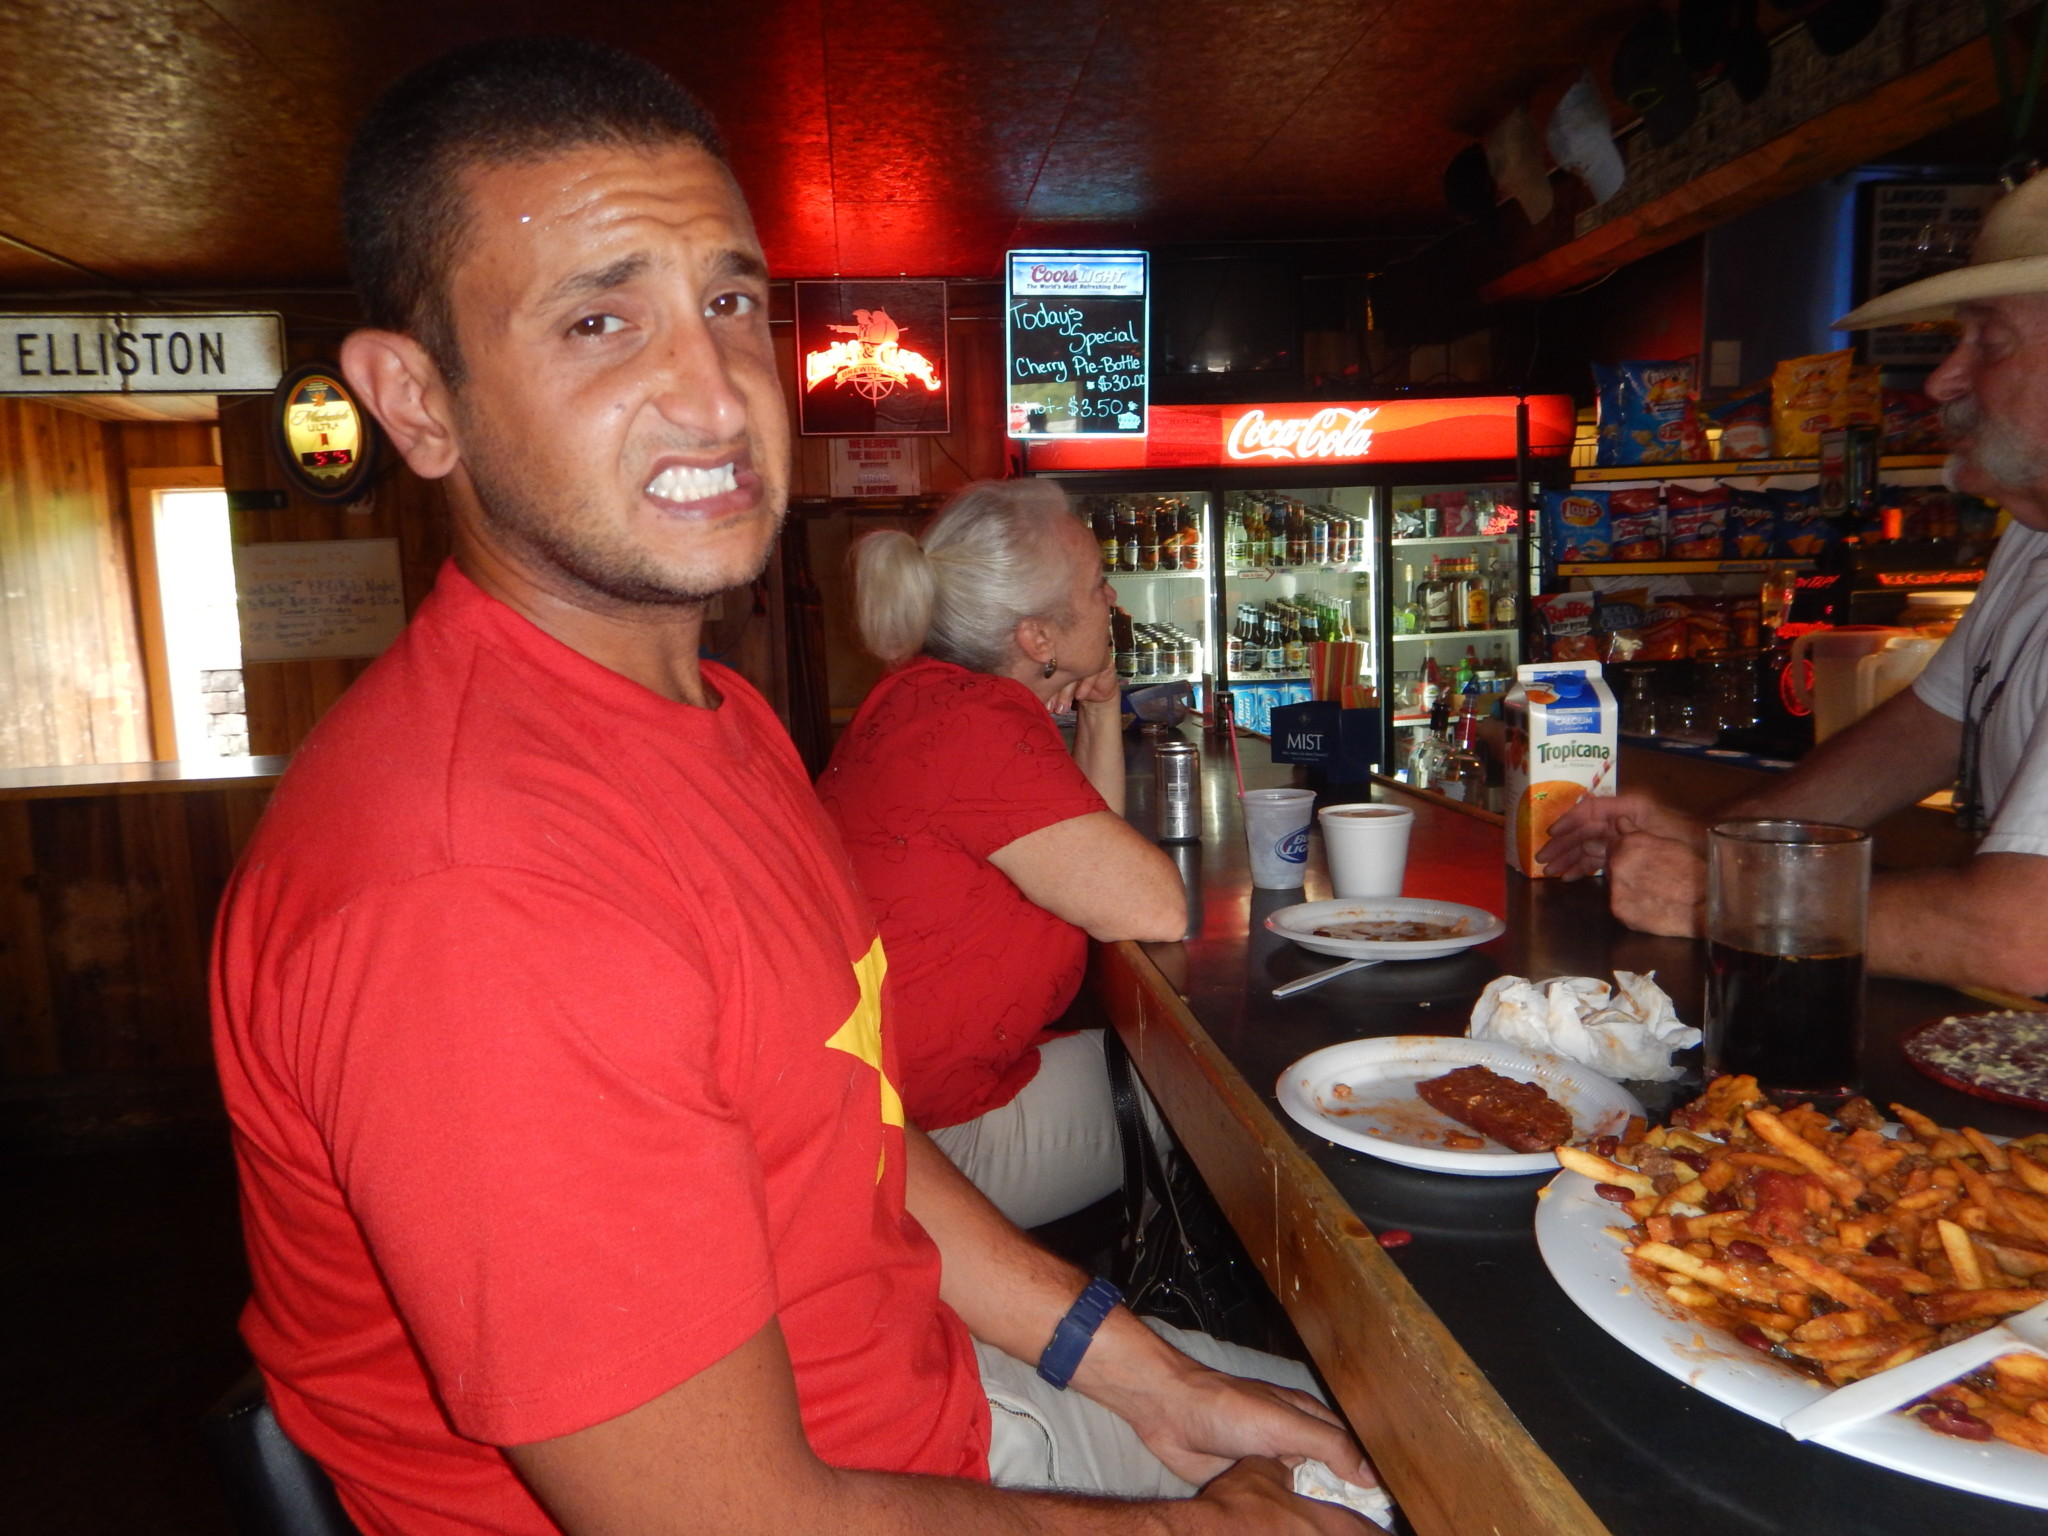 a man in a red shirt sitting at a bar with food on plates